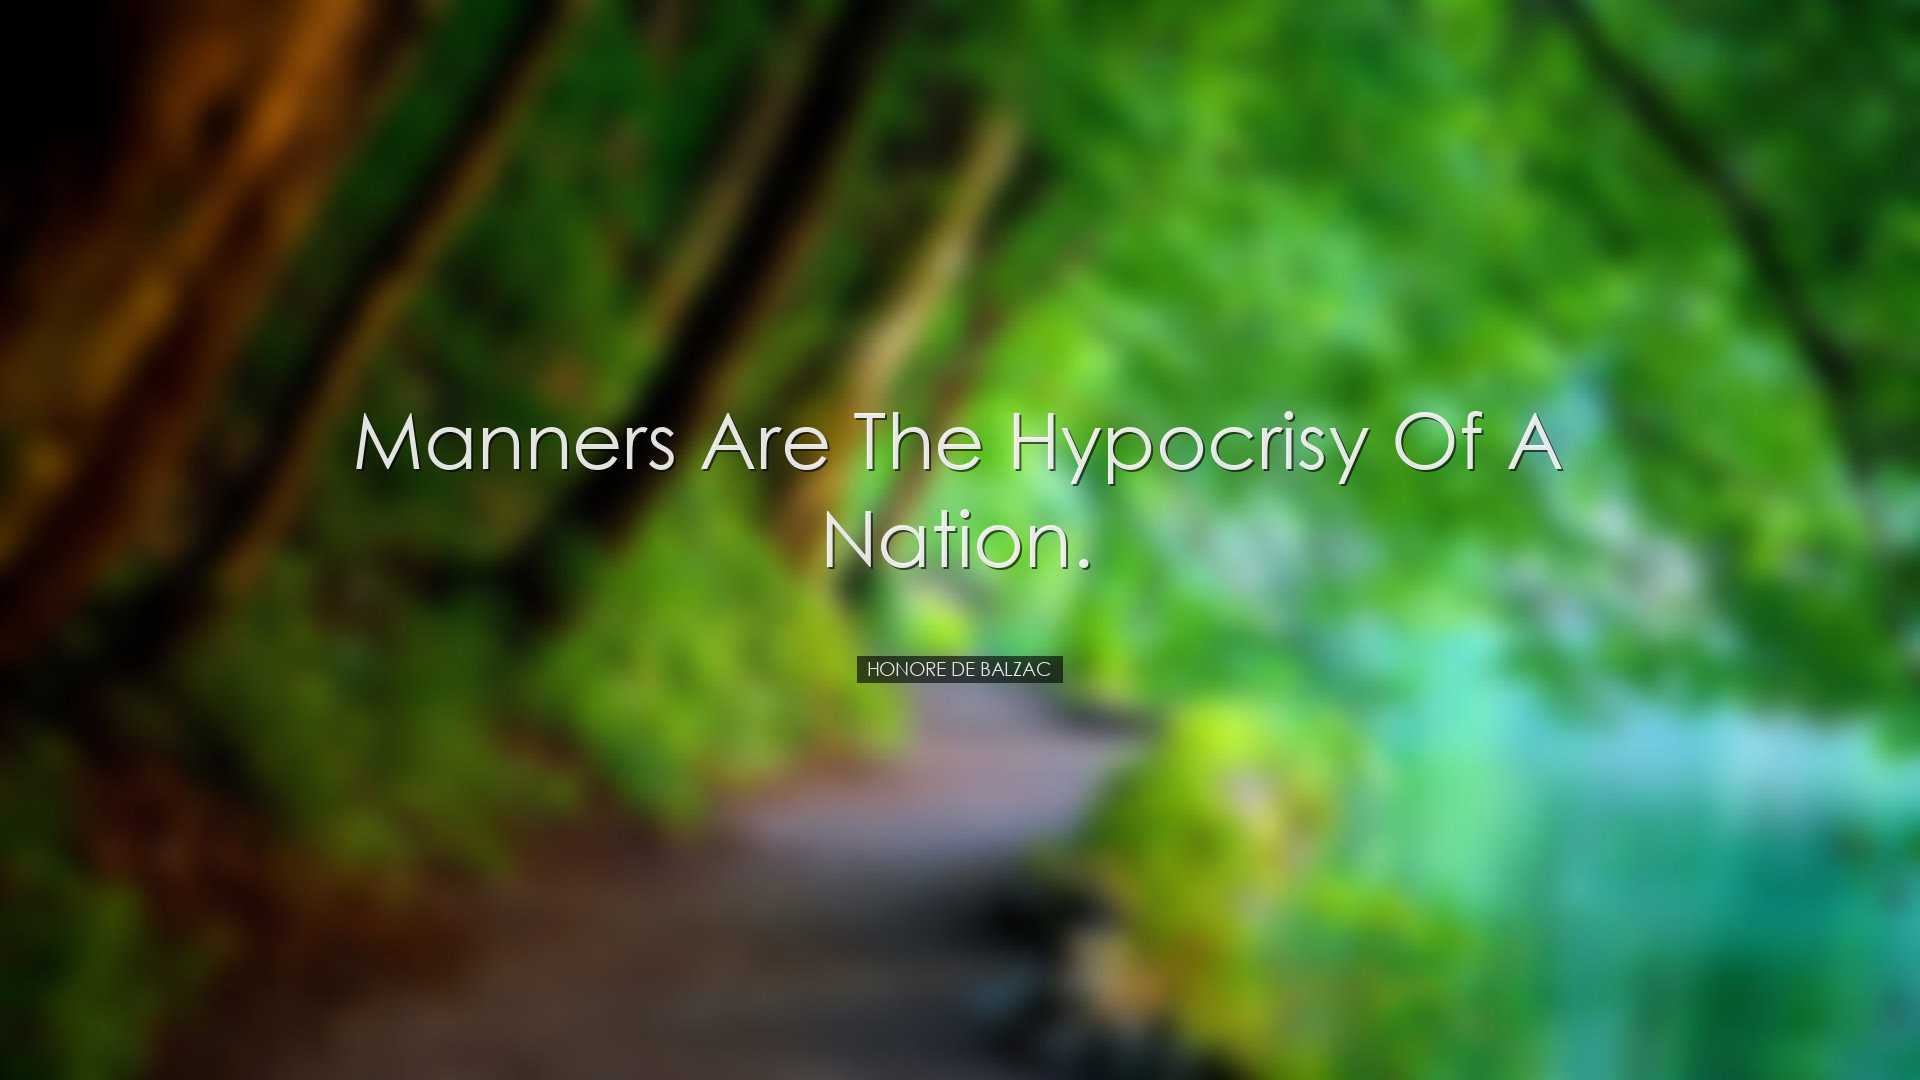 Manners are the hypocrisy of a nation. - Honore de Balzac